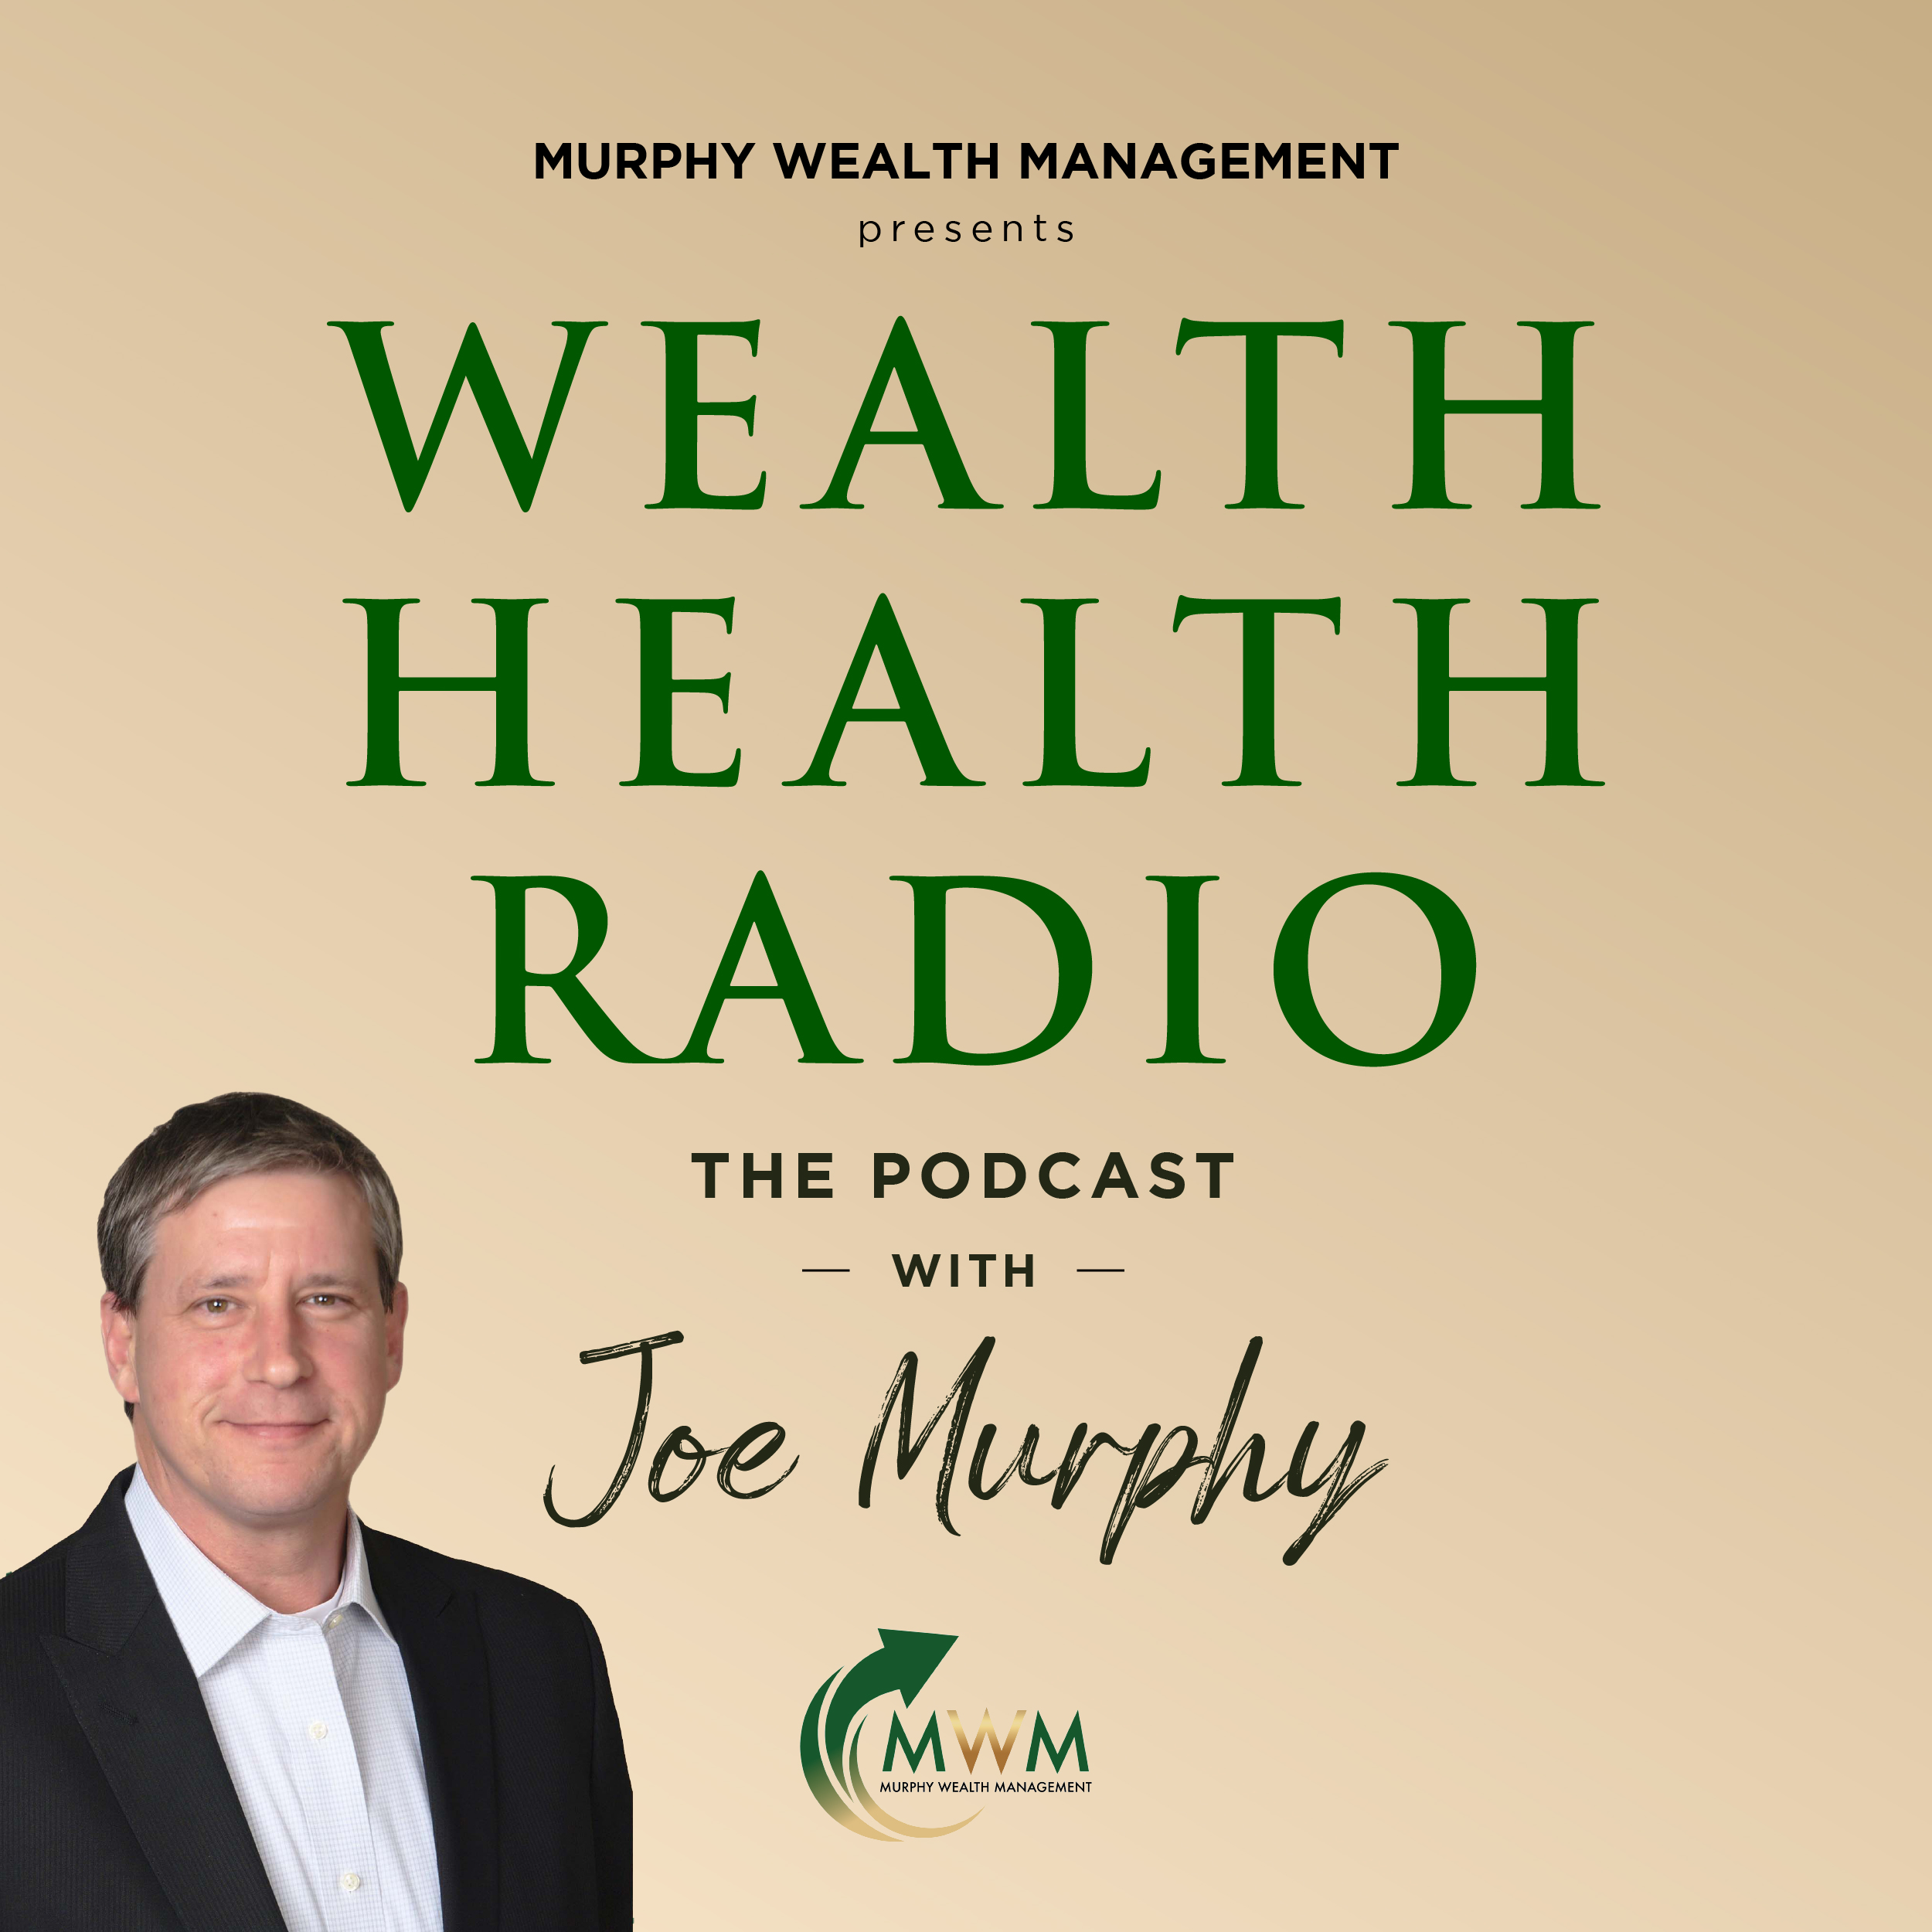 Wealth Health Radio This week, Joe Murphy offers some ways to tackle inflation while in retirement.